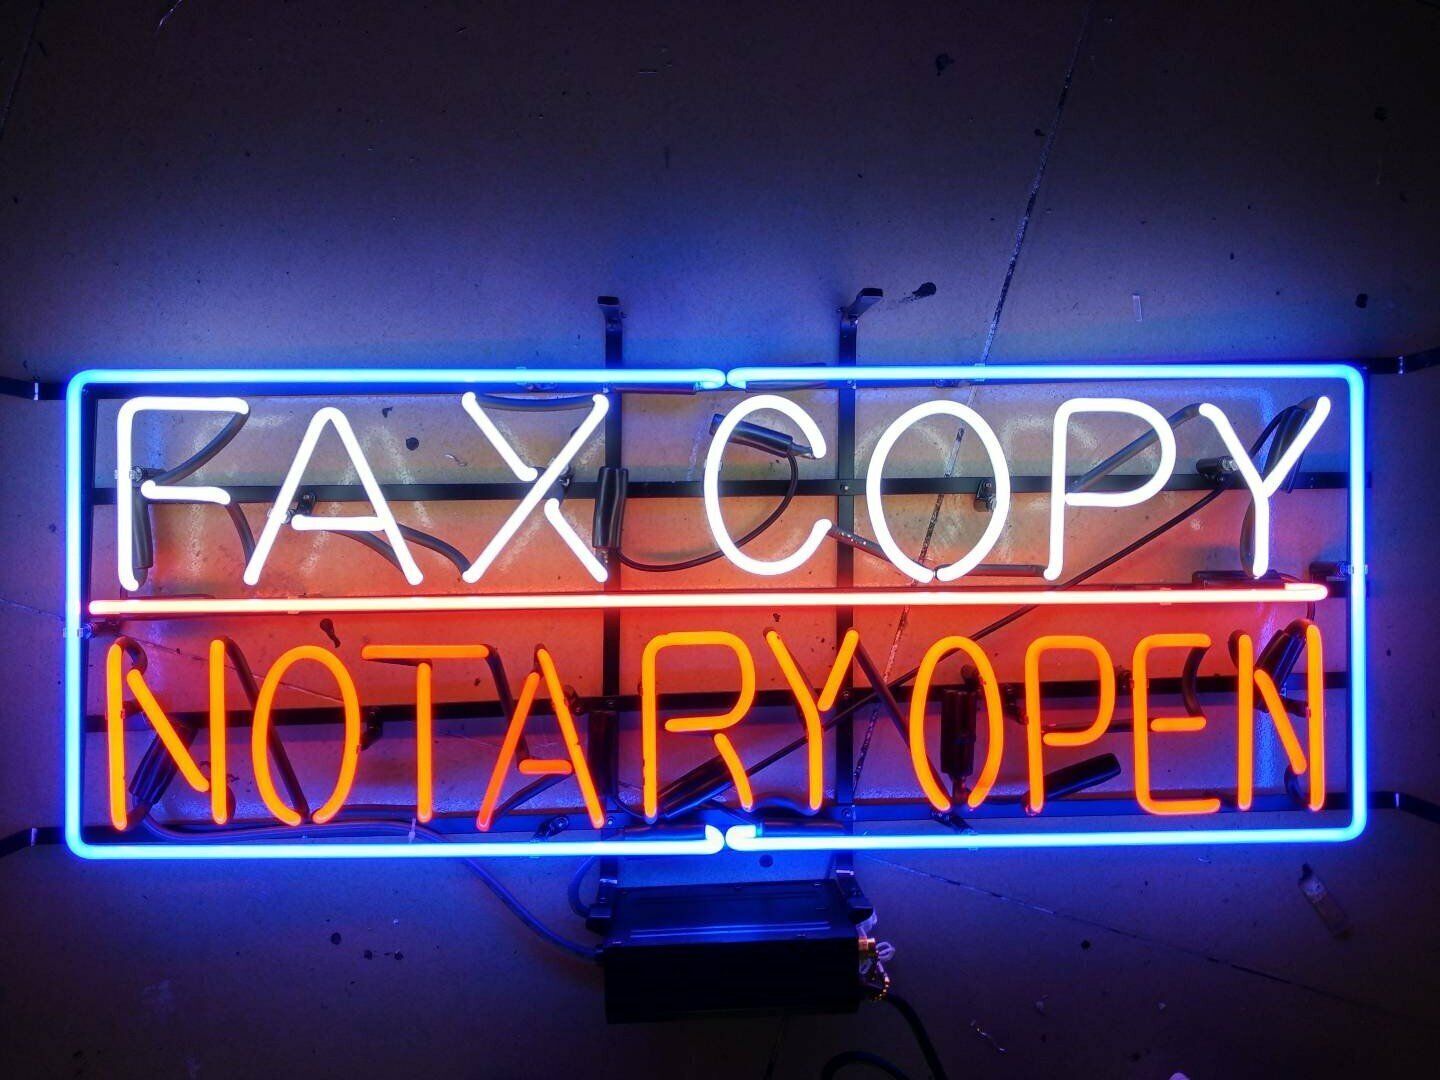 New Fax Copy Notary Open Neon Light Sign 24